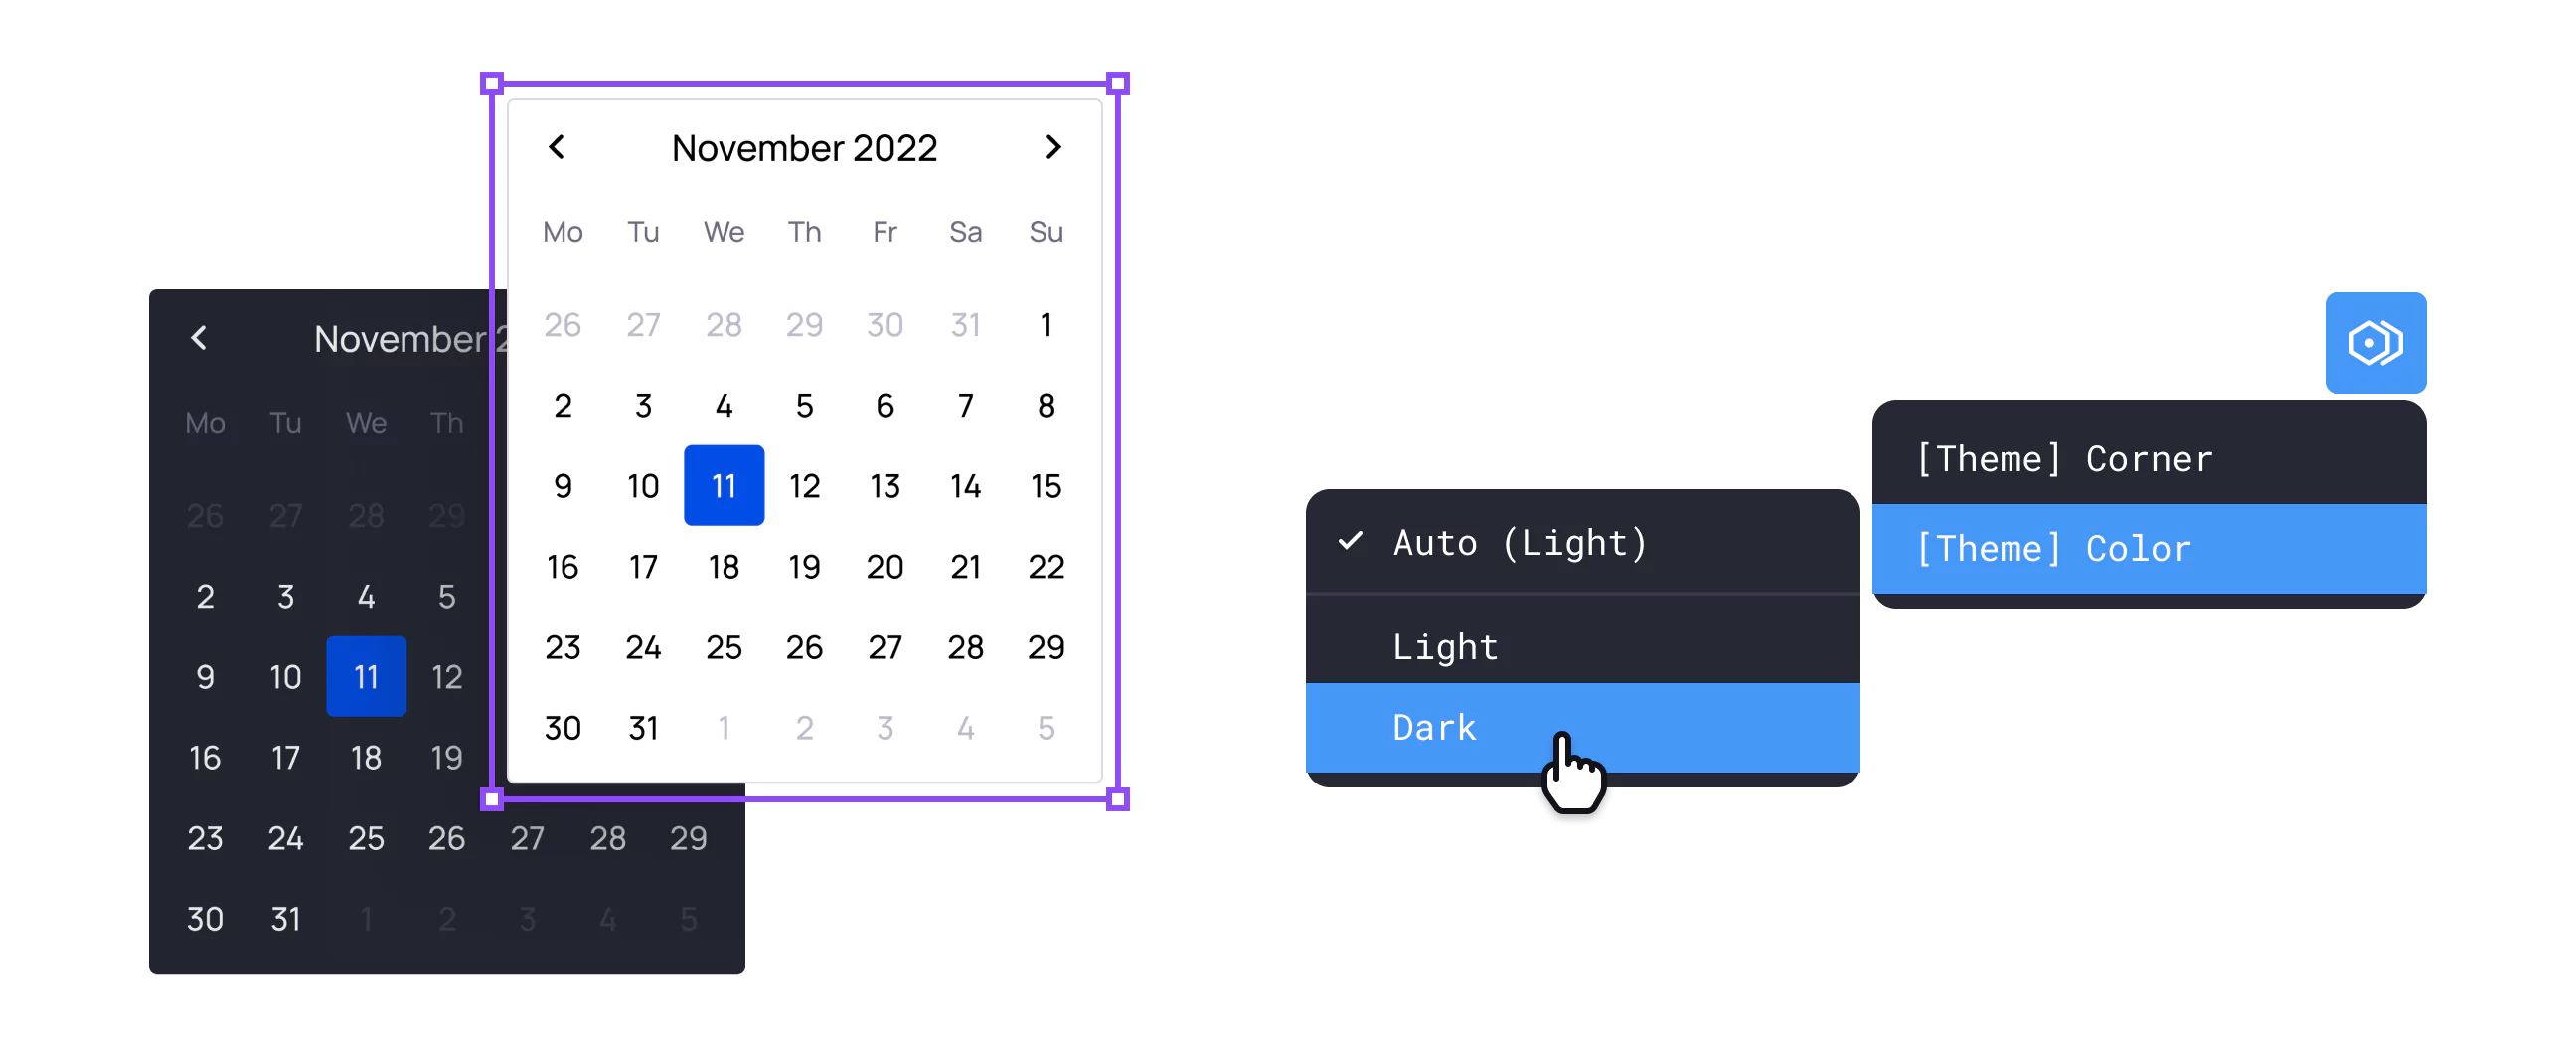 Switching between light and dark themes using variable modes